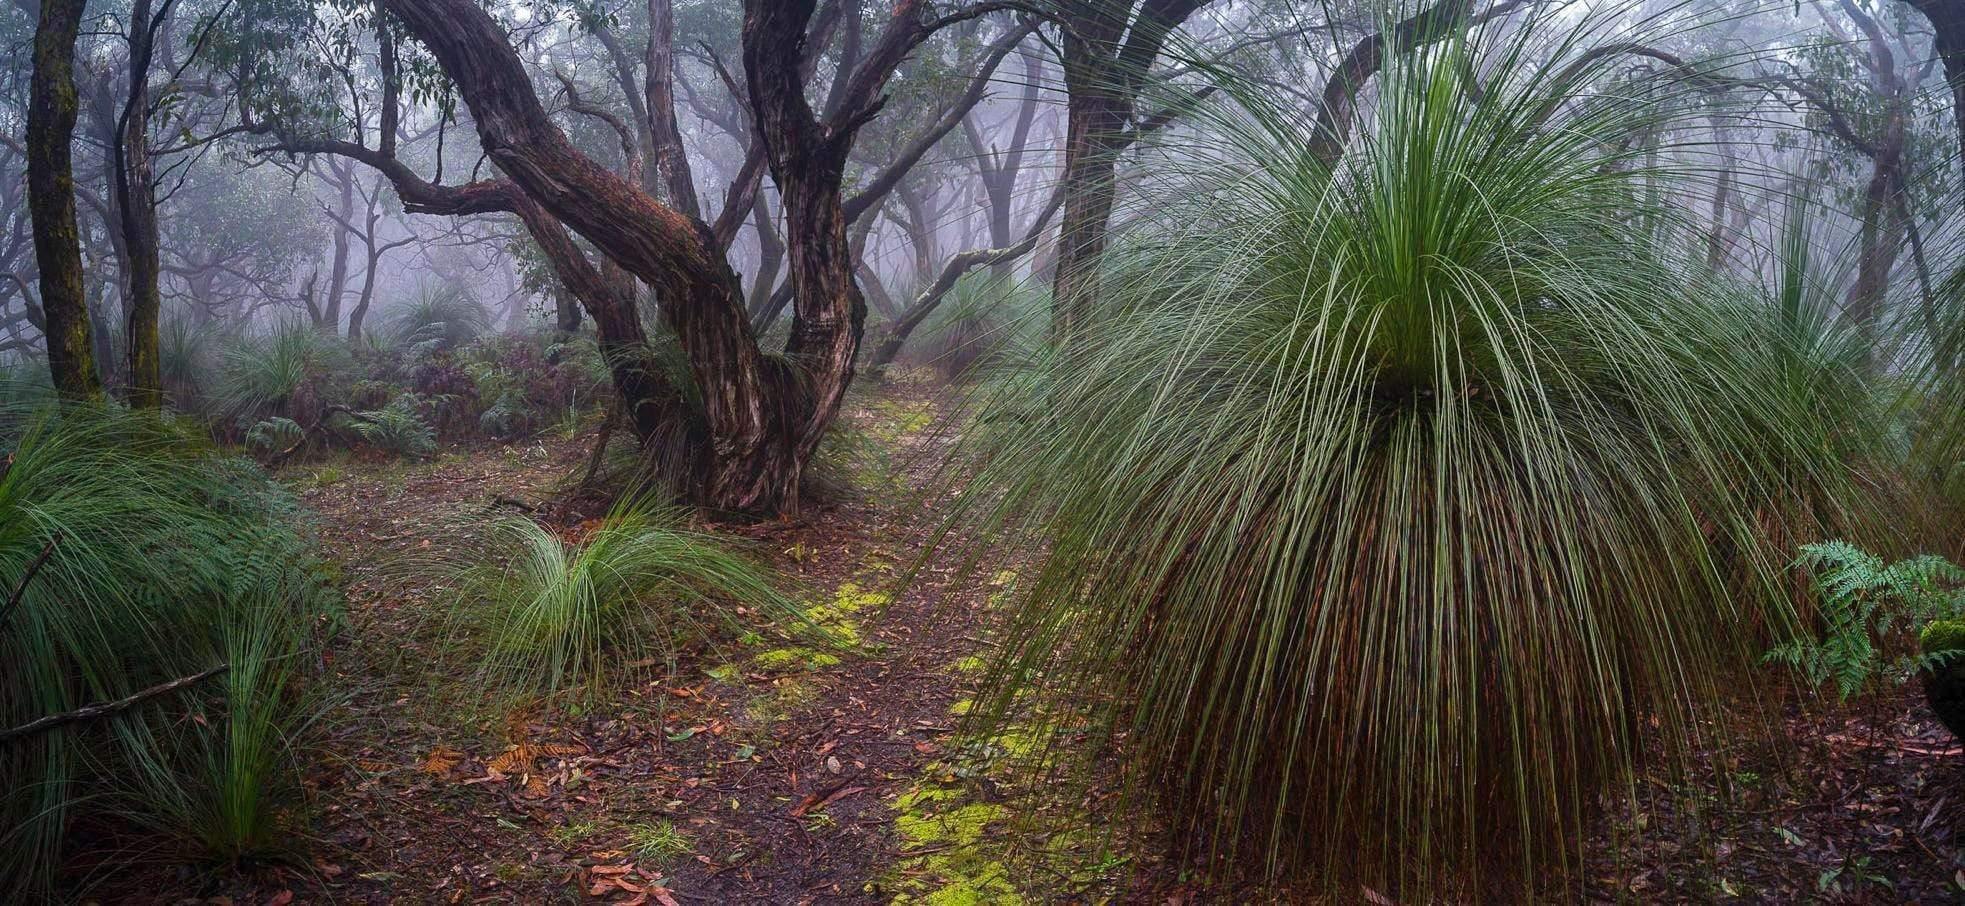 Some bushes and trees in a forest, The Path - Mornington Peninsula VIC